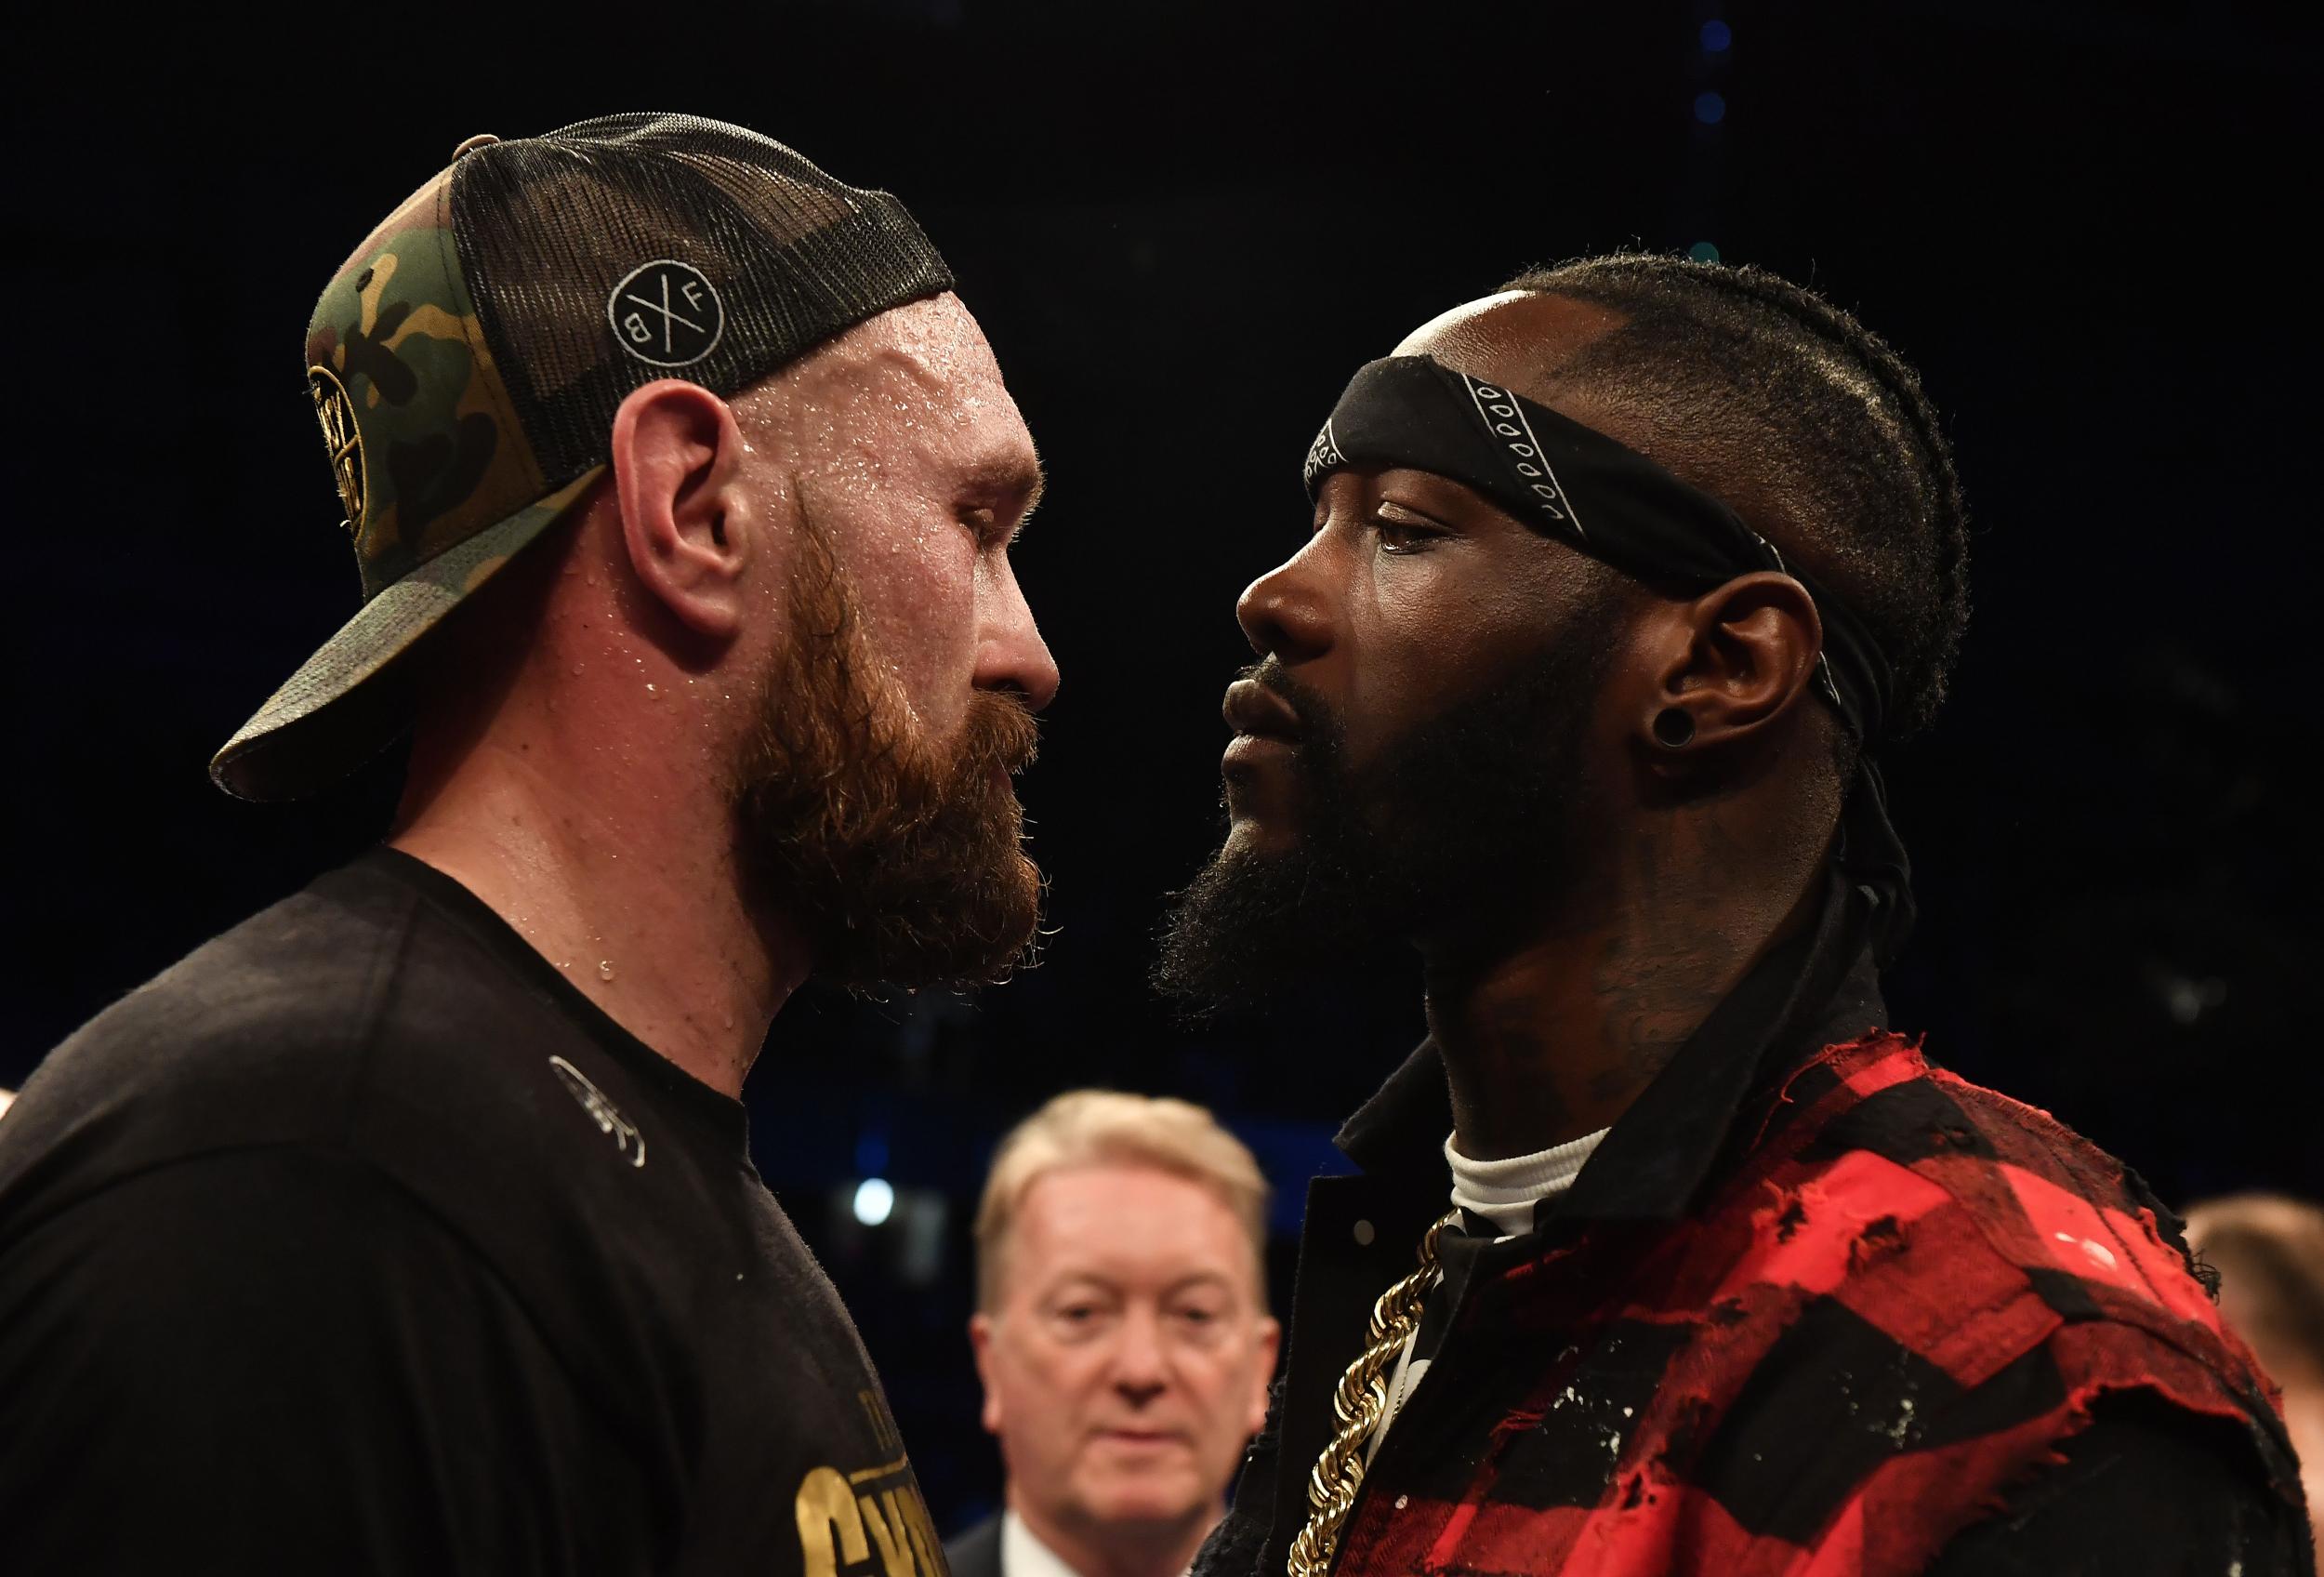 Tyson Fury and Deontay Wilder go head-to-head on 1 December